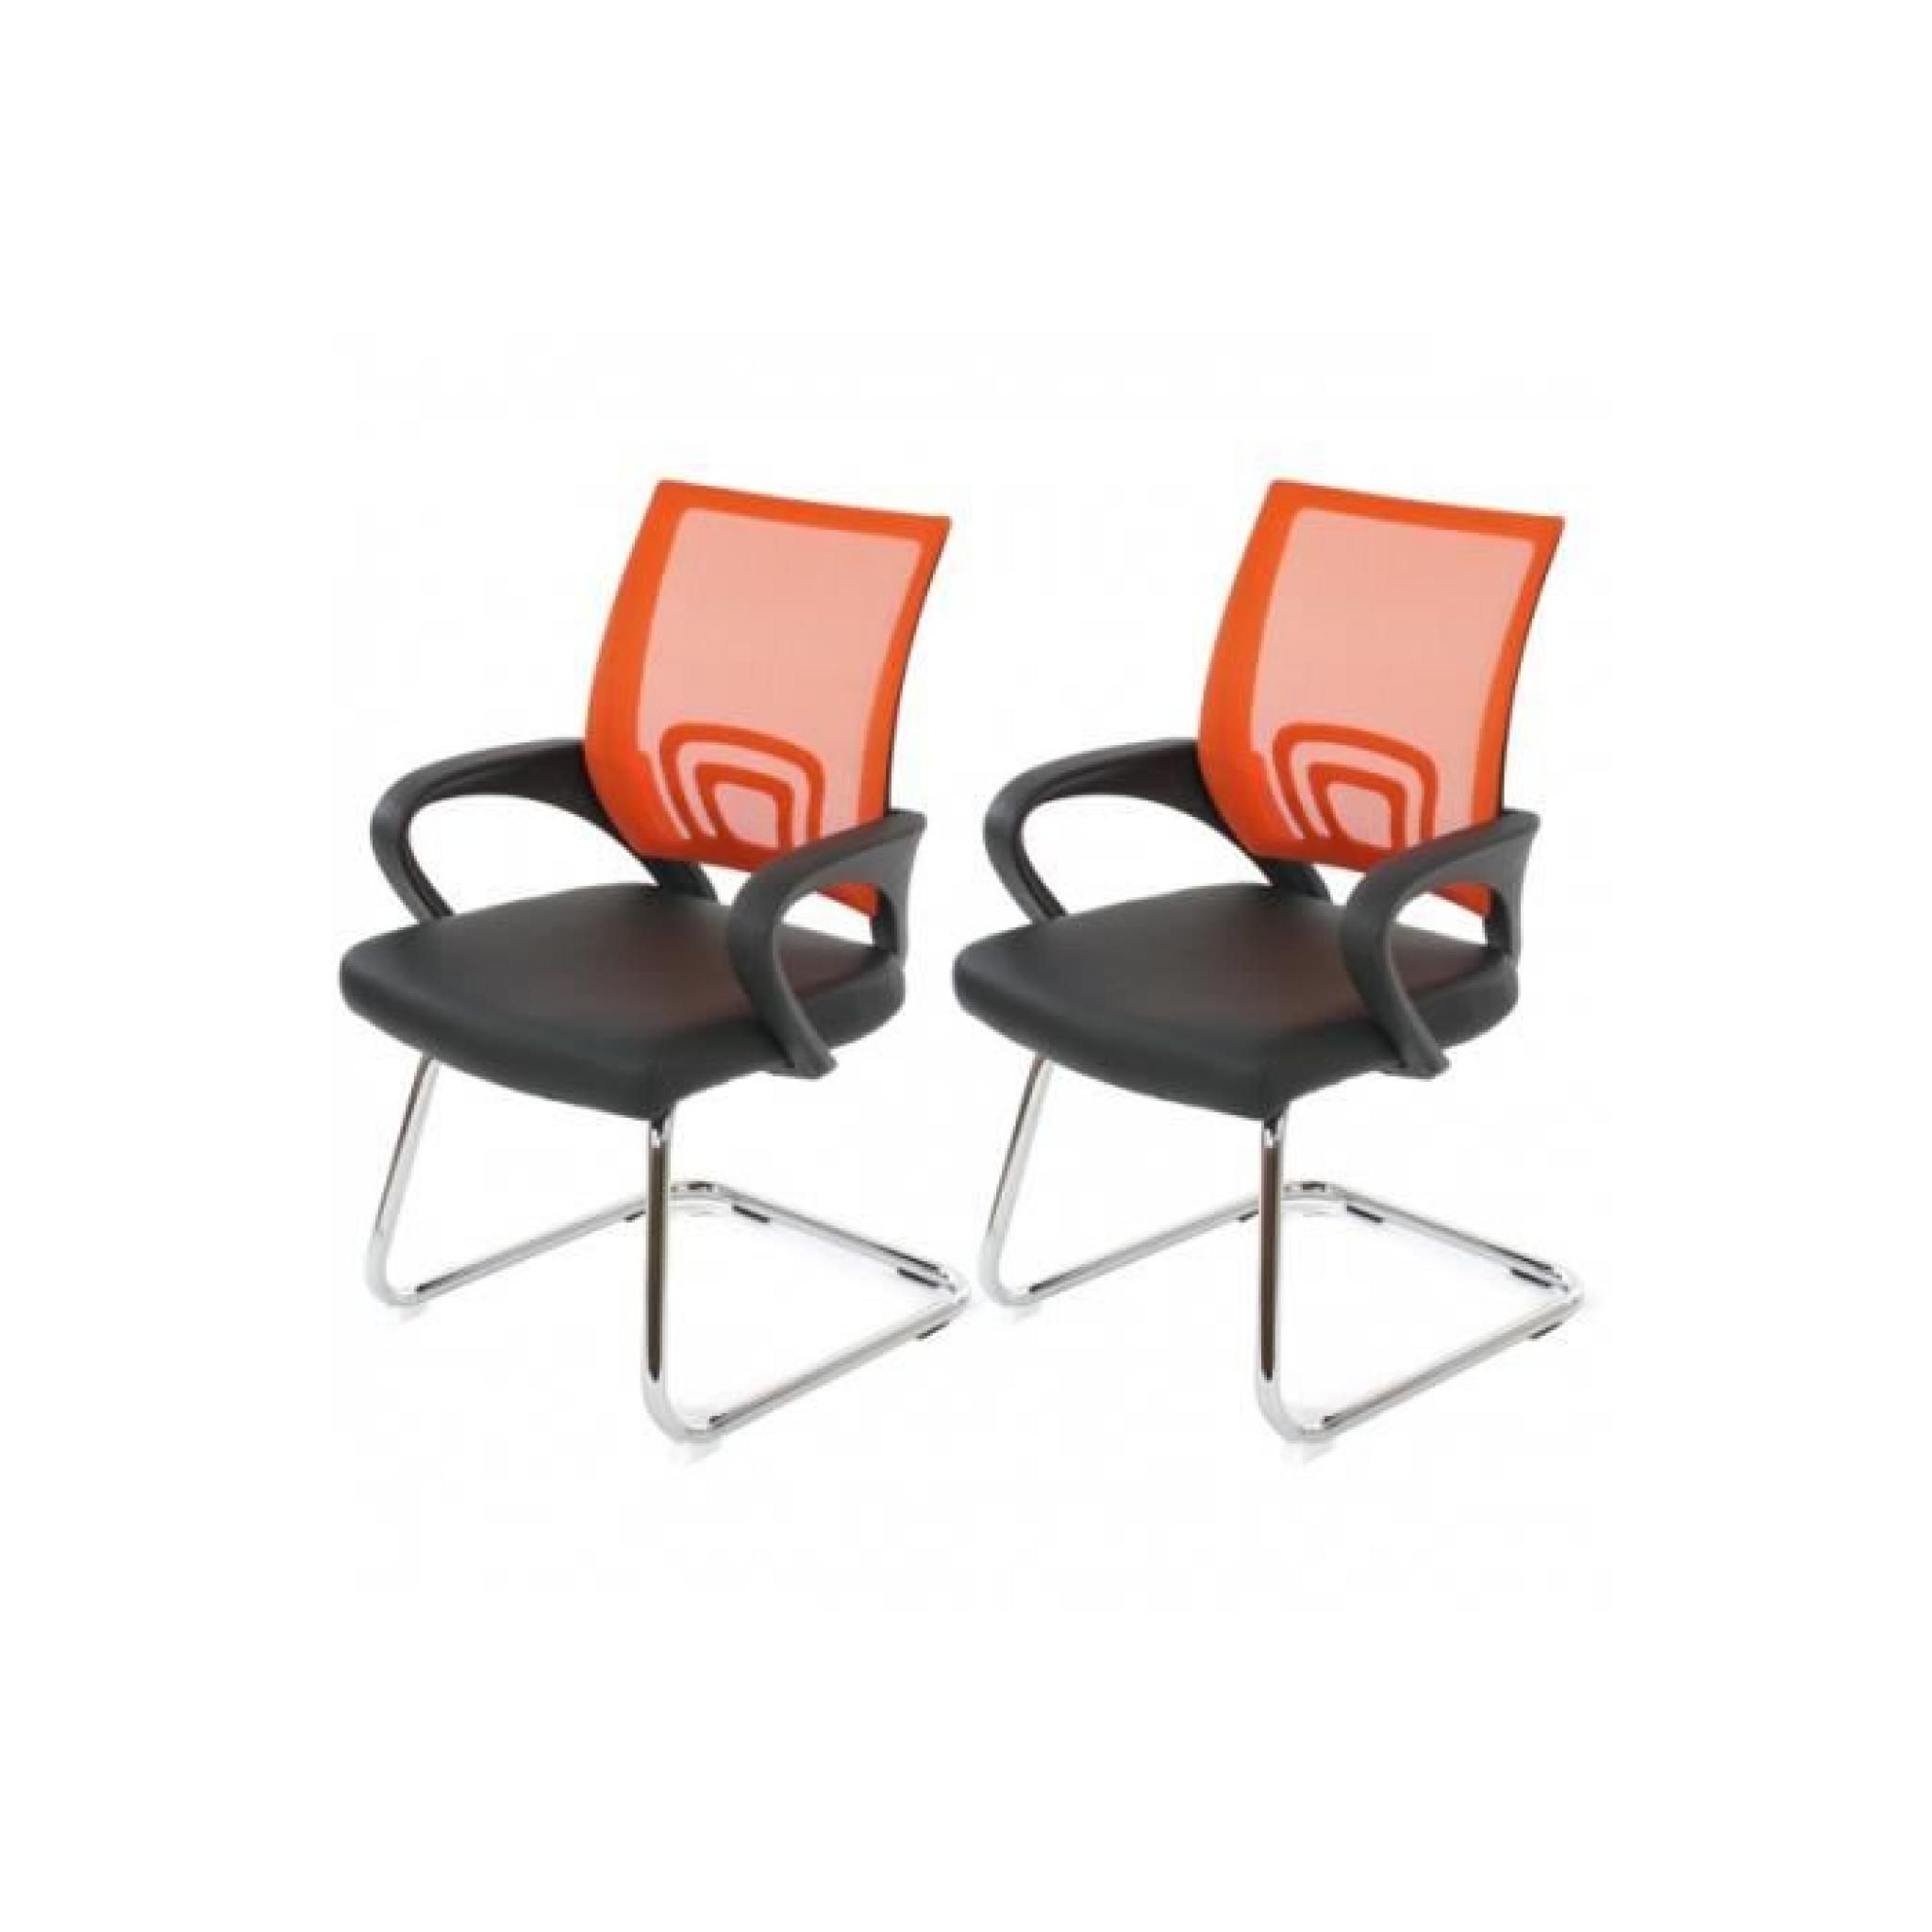 Chaise d'acceuil Ancona x2 Orange